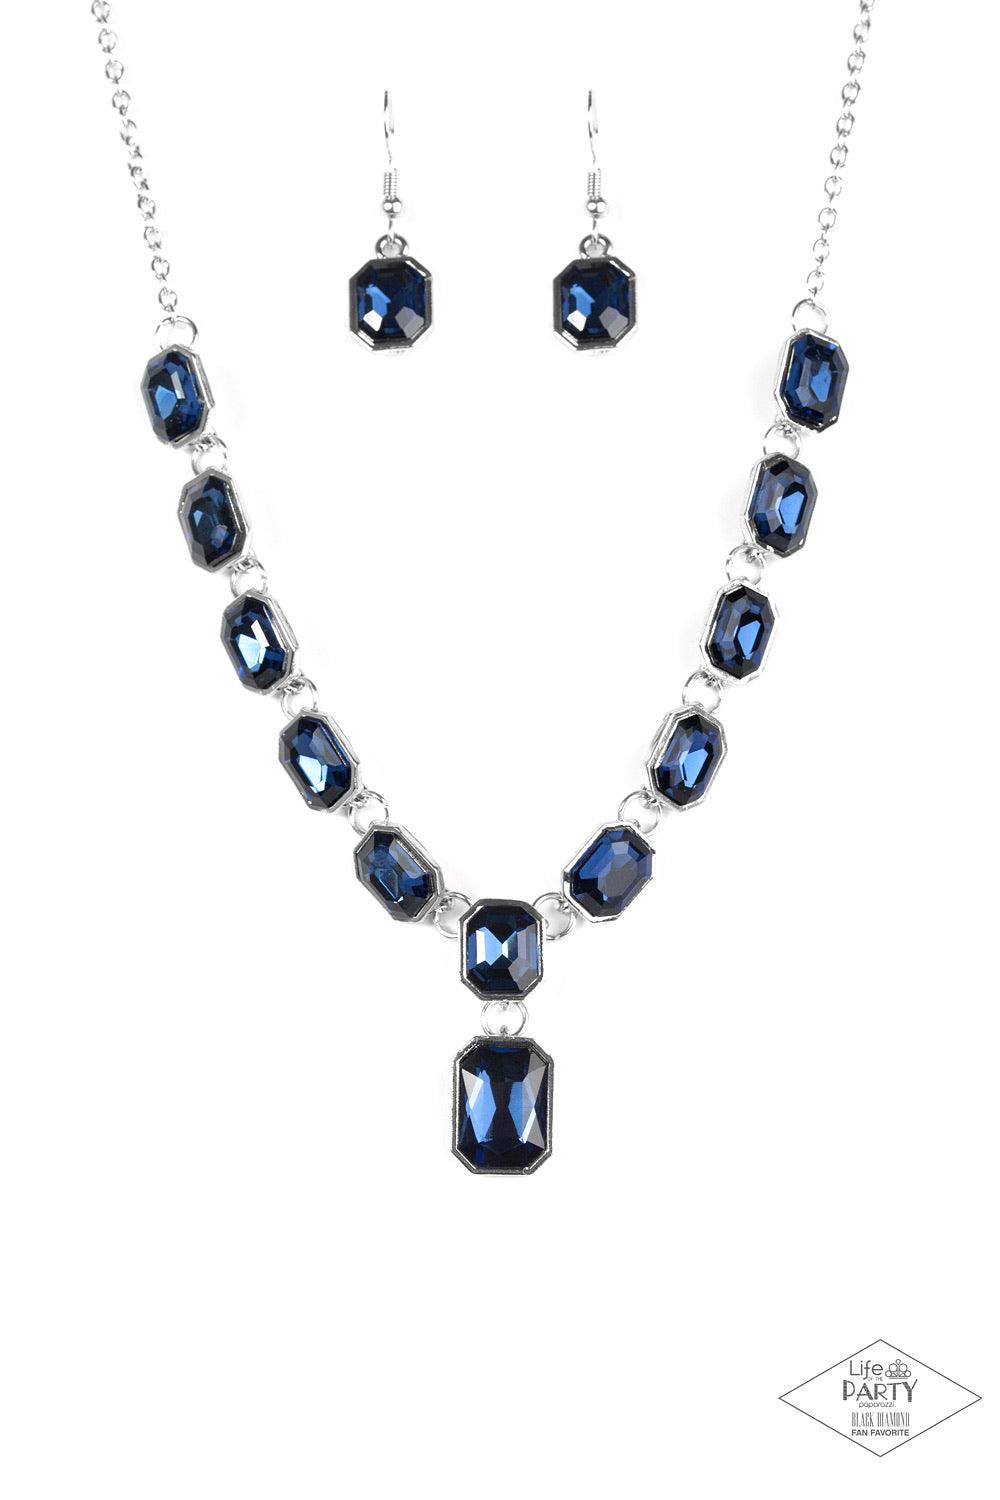 Paparazzi Accessories The Right To Remain Sparkly - Blue Featuring regal emerald style cuts, glittery blue gems link below the collar in an undeniably sparkly fashion. A slightly larger blue gem swings from the center, creating an eye-catching pendant. Fe